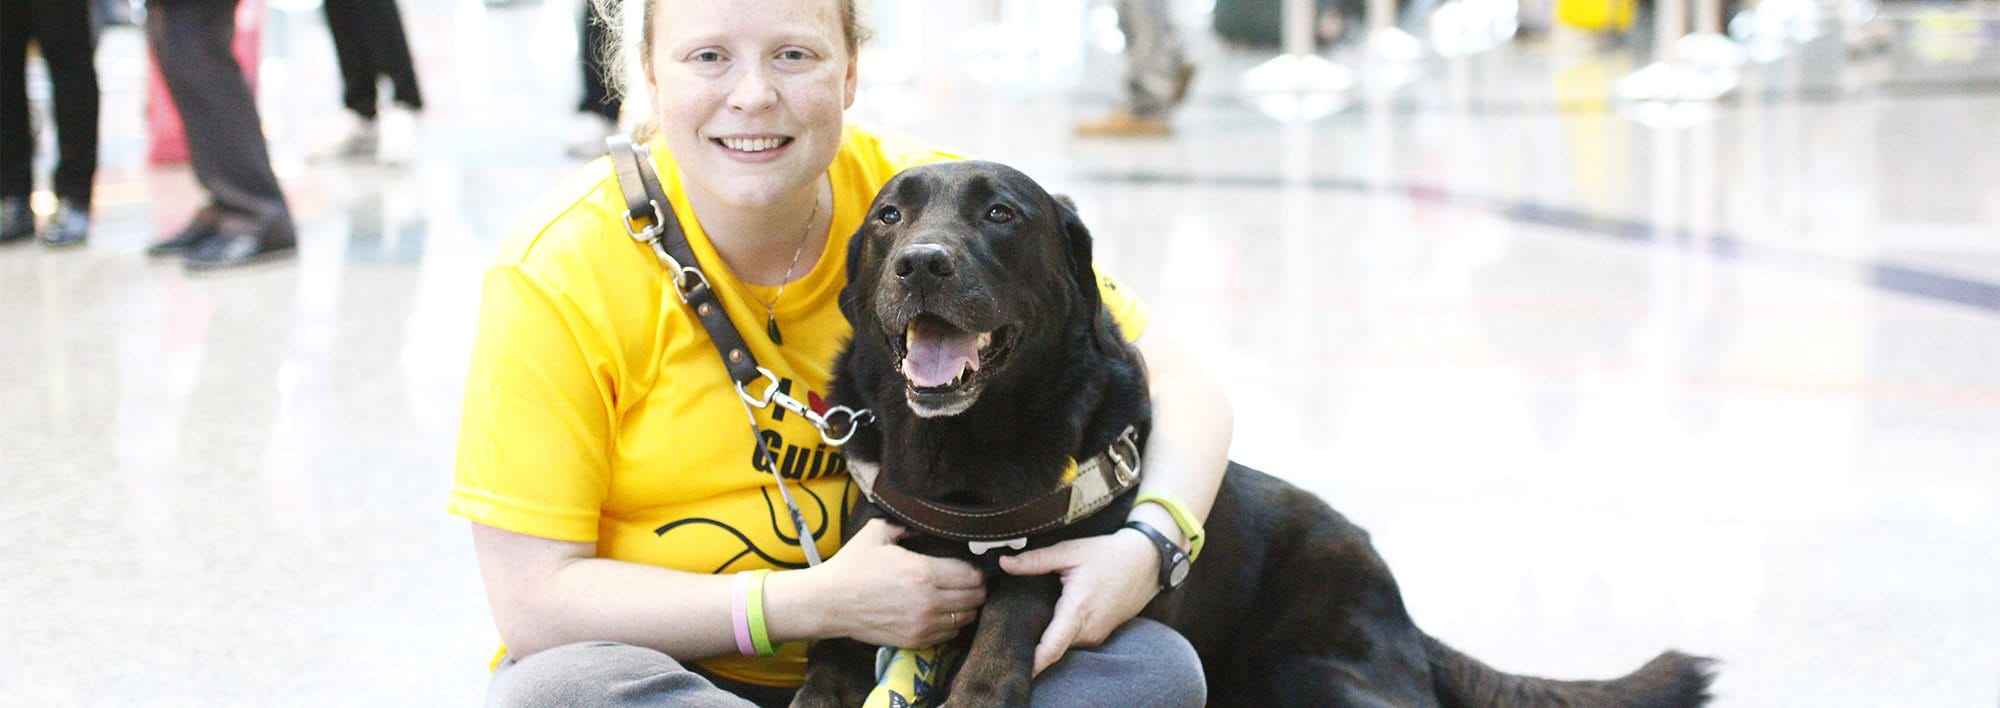 A woman sits cross-legged on a white floor with a black lab in harness partially on her lap. She is smiling at the camera